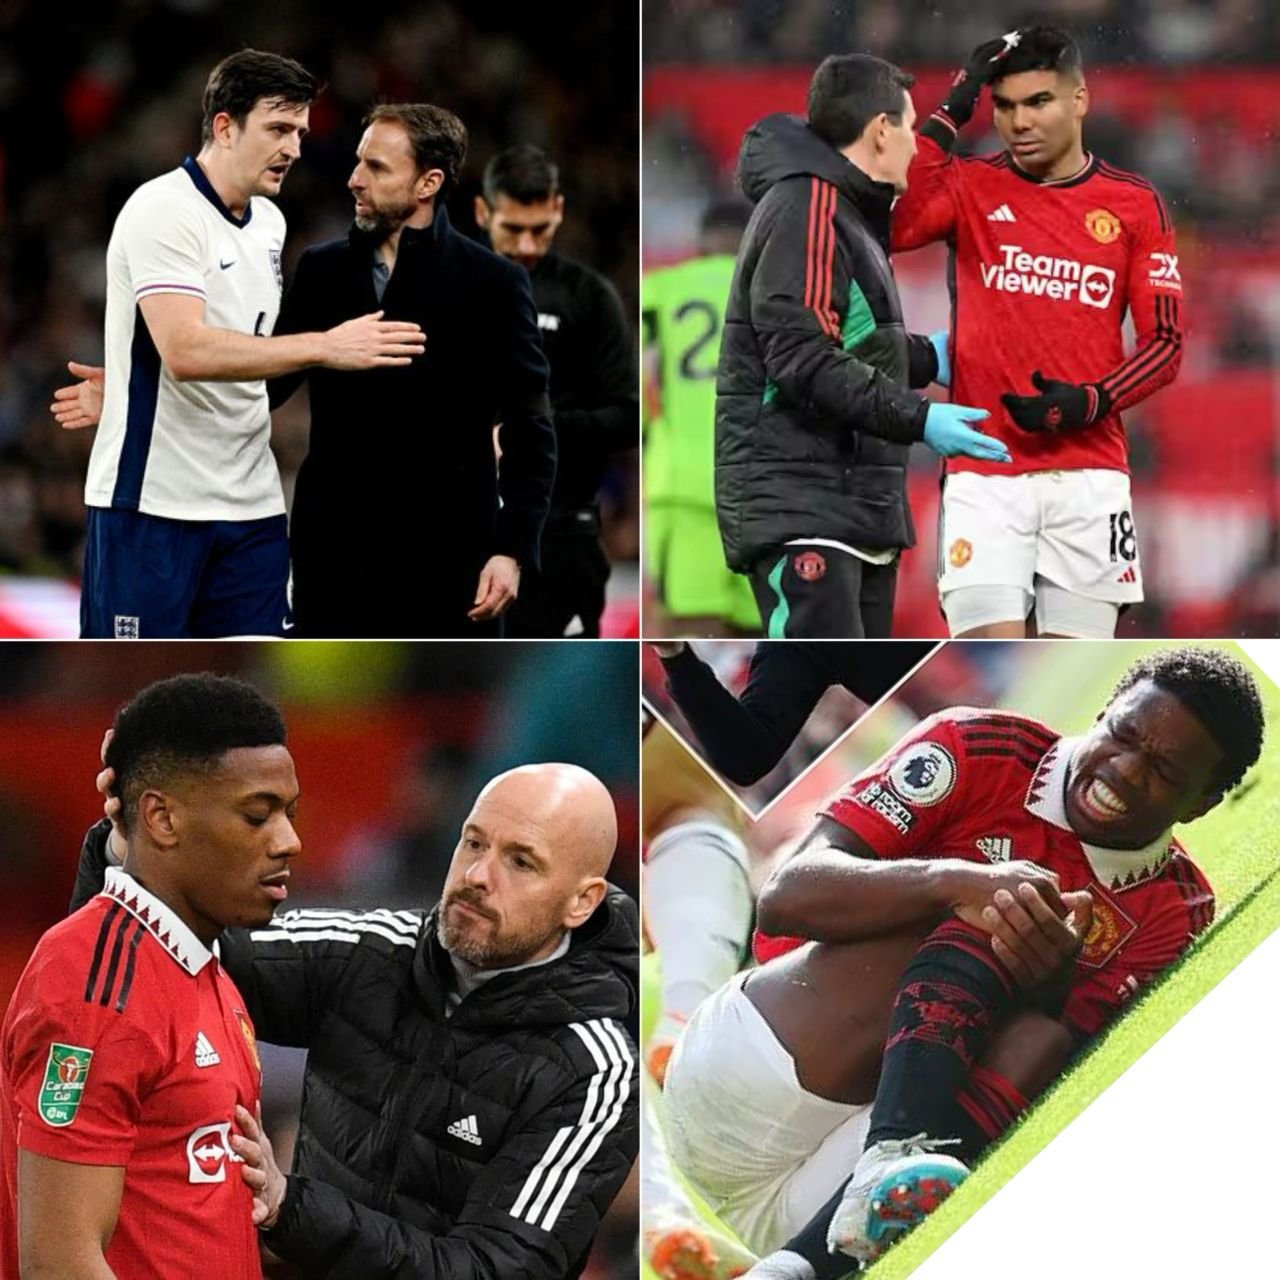 Manchester United latest injury news and return dates for these players vs Brentford match on saturday - Tyrell Malacia, Altay Bayindir, Anthony Martial, Harry Maguire, Luke Shaw, Lisandro Martinez